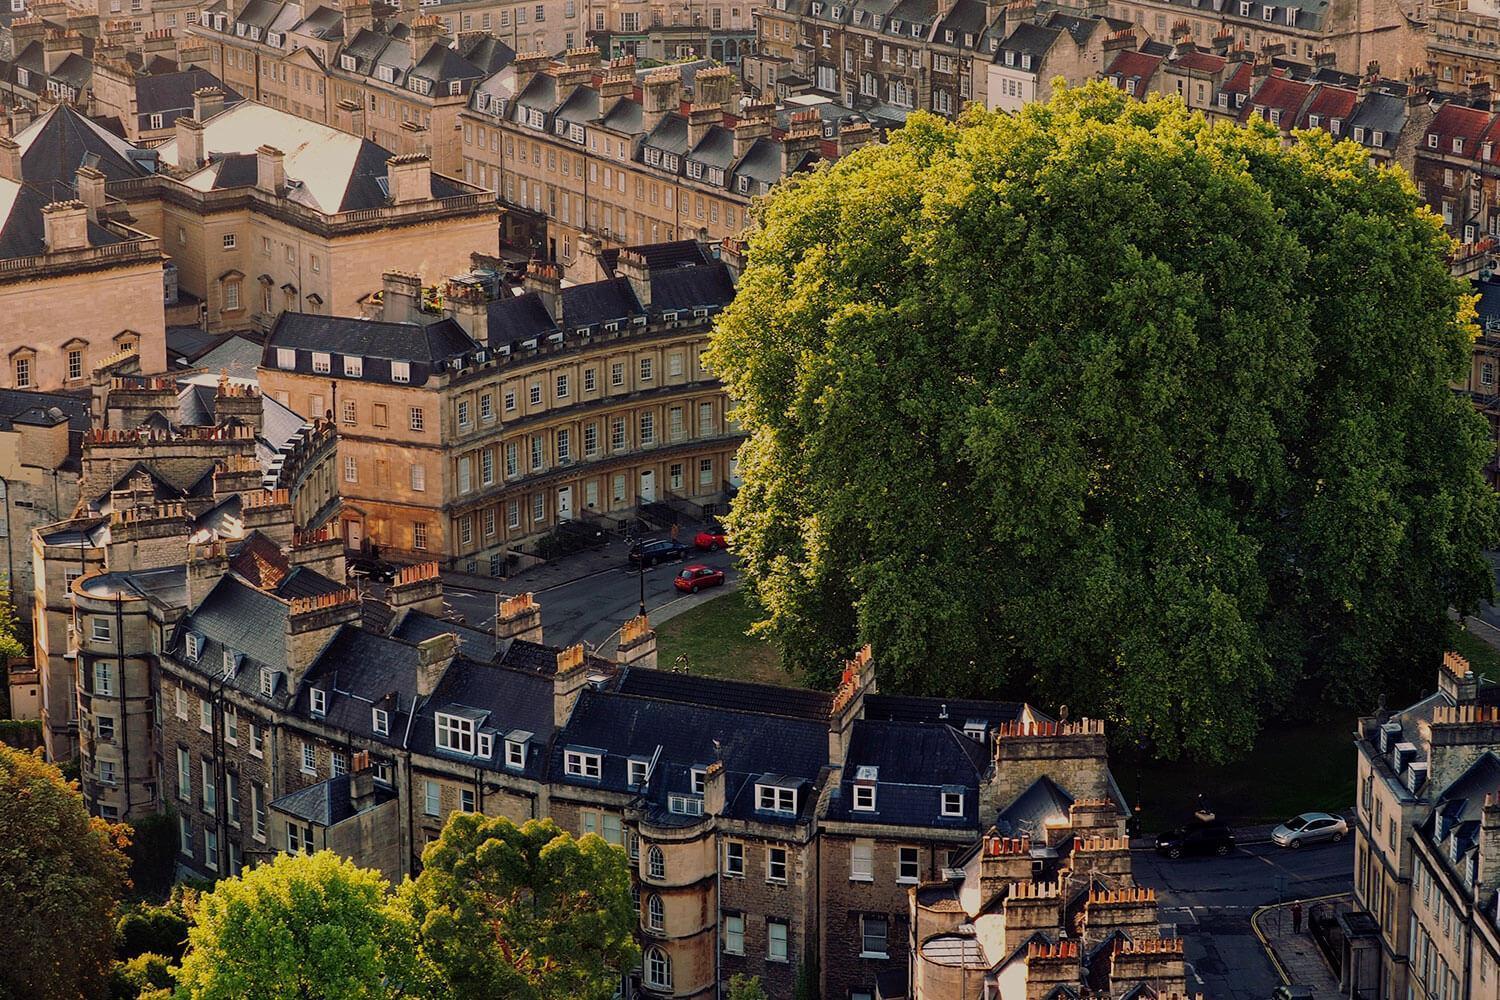 Bath city centre from above, showing a large tree